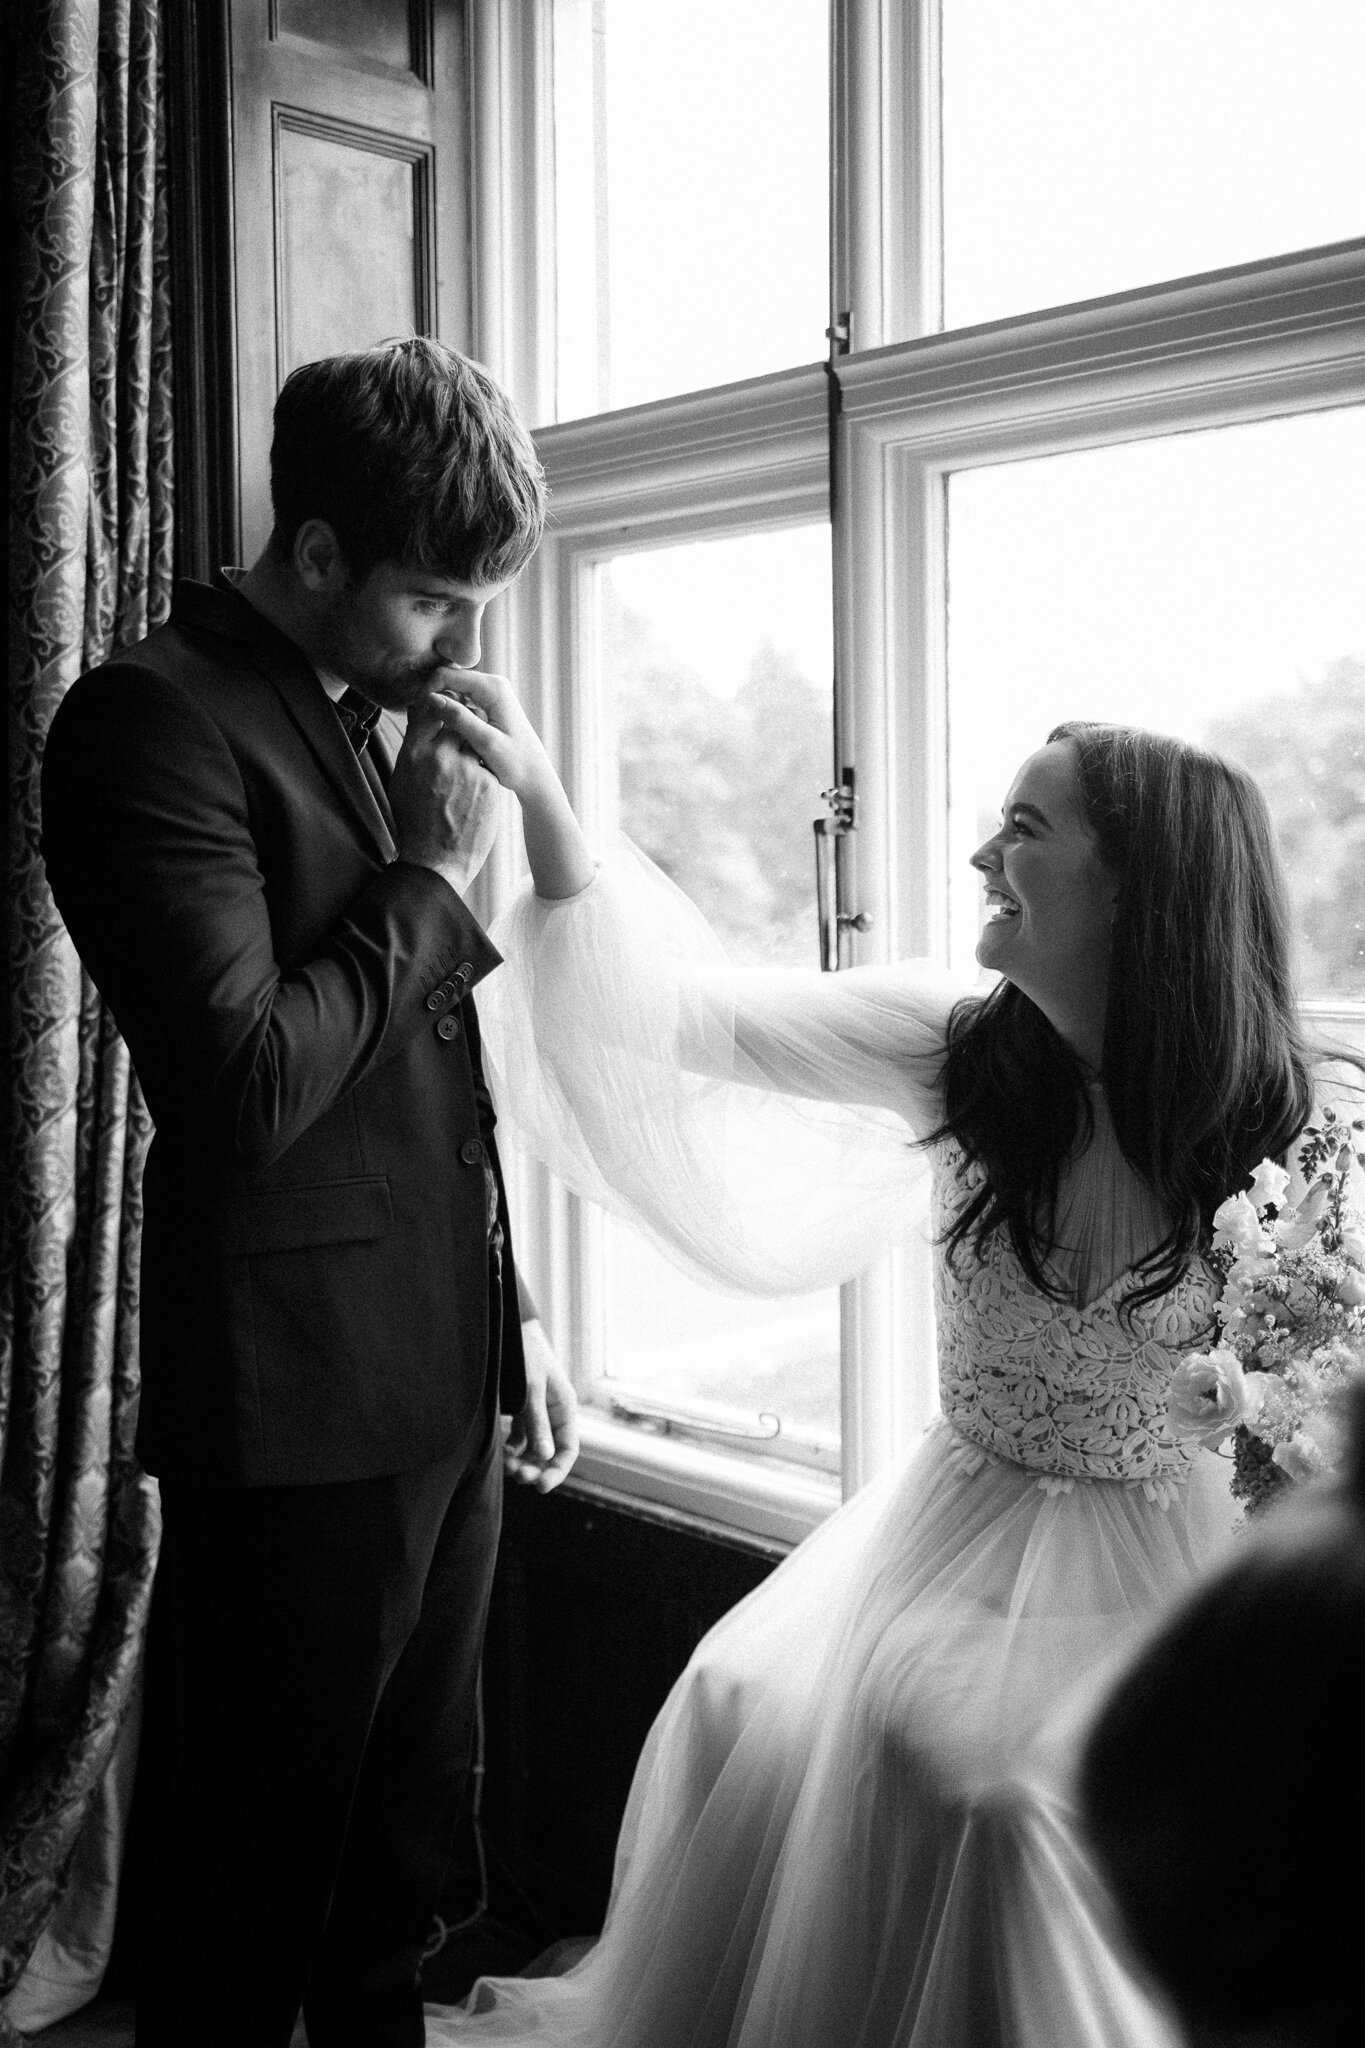 Lilly Wilson Photography - Micro Wedding in Wales